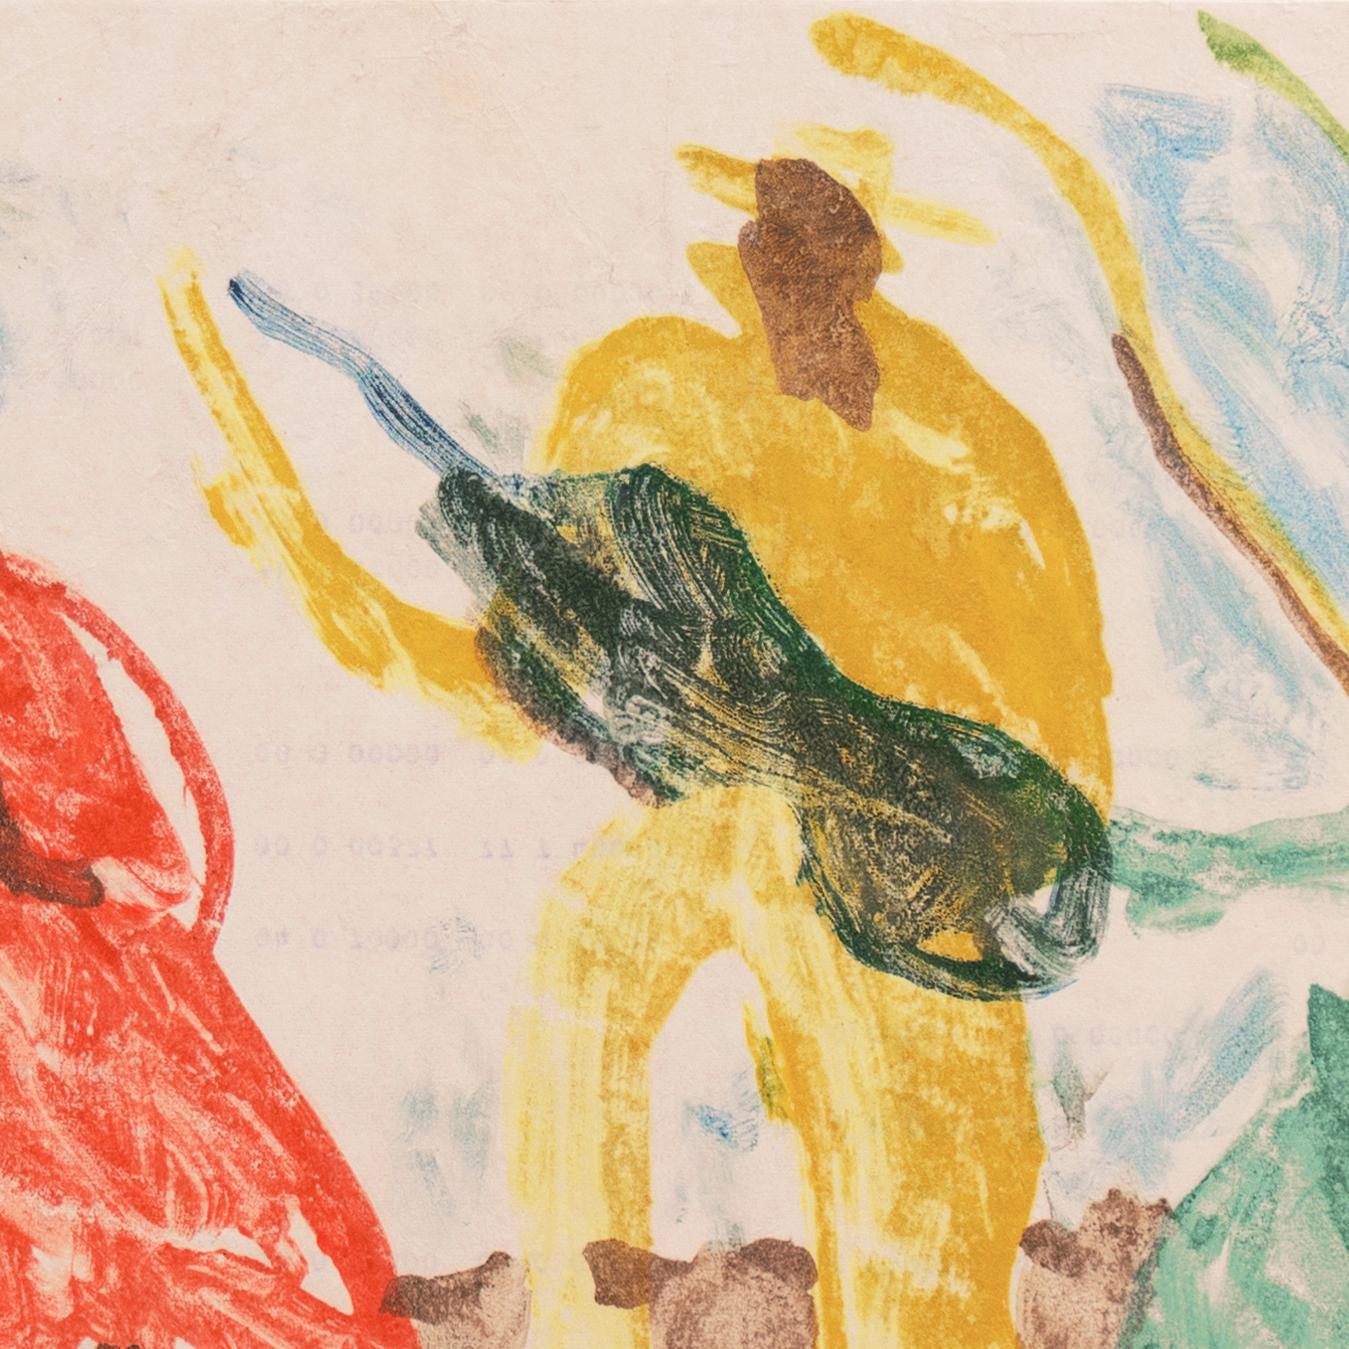 Stamped, verso, with estate stamp for Victor Di Gesu (American, 1914-1988) and created circa 1955.

A Post-Impressionist figural monotype showing a woman standing beneath a tree in the foreground with a guitarist and a flamenco dancer